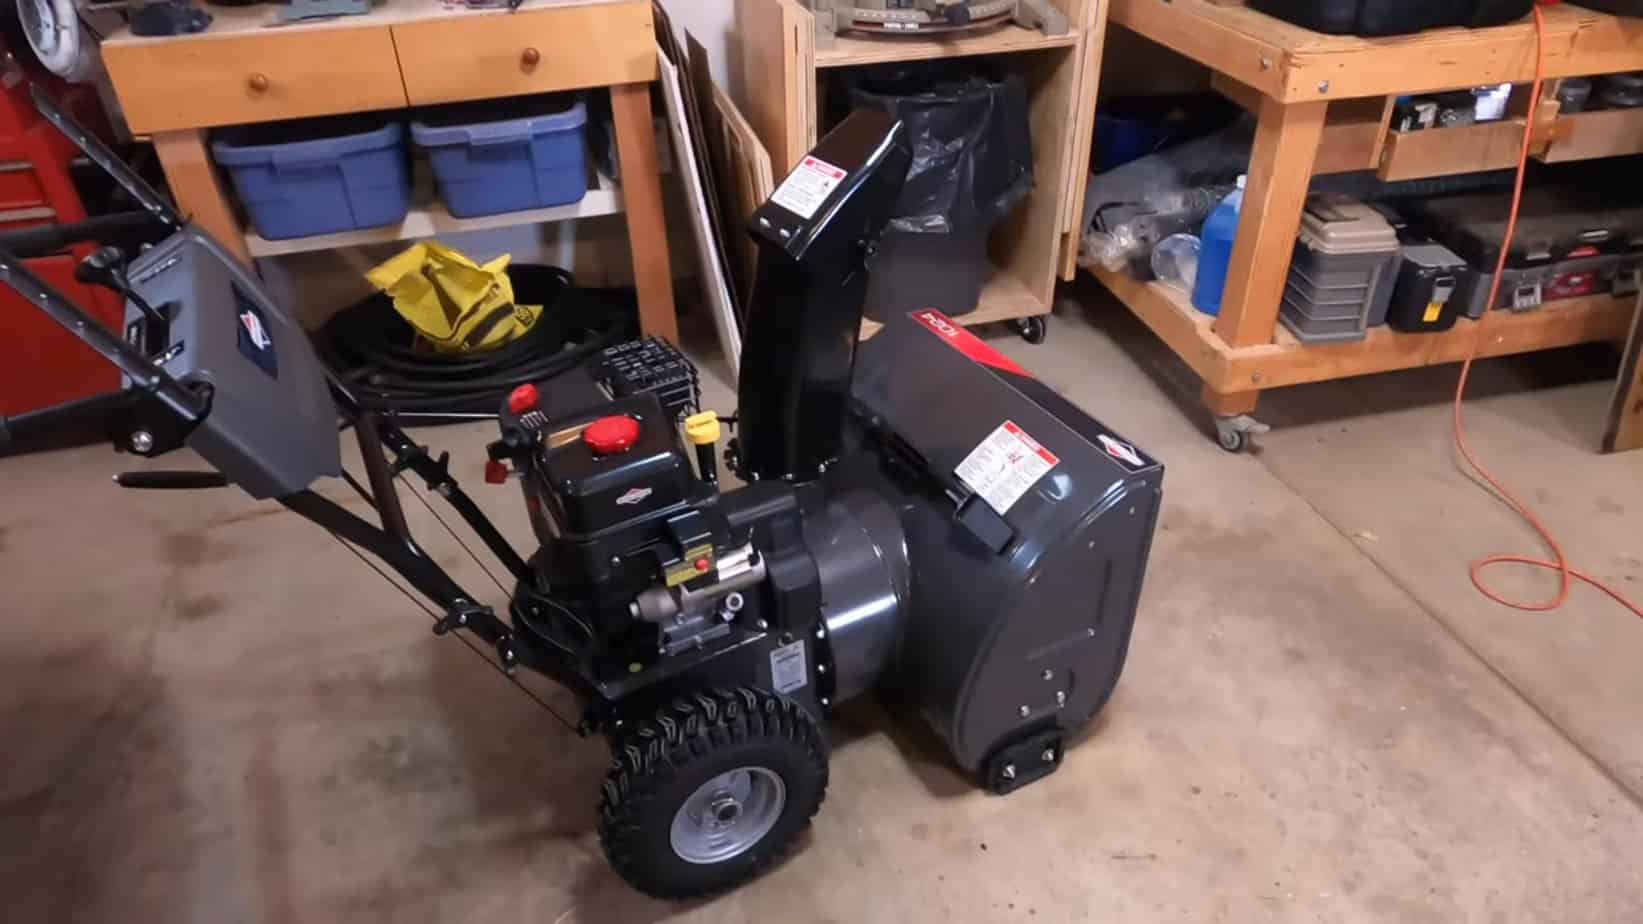 Briggs & Stratton Dual Stage Electric Snow Blower in the garage